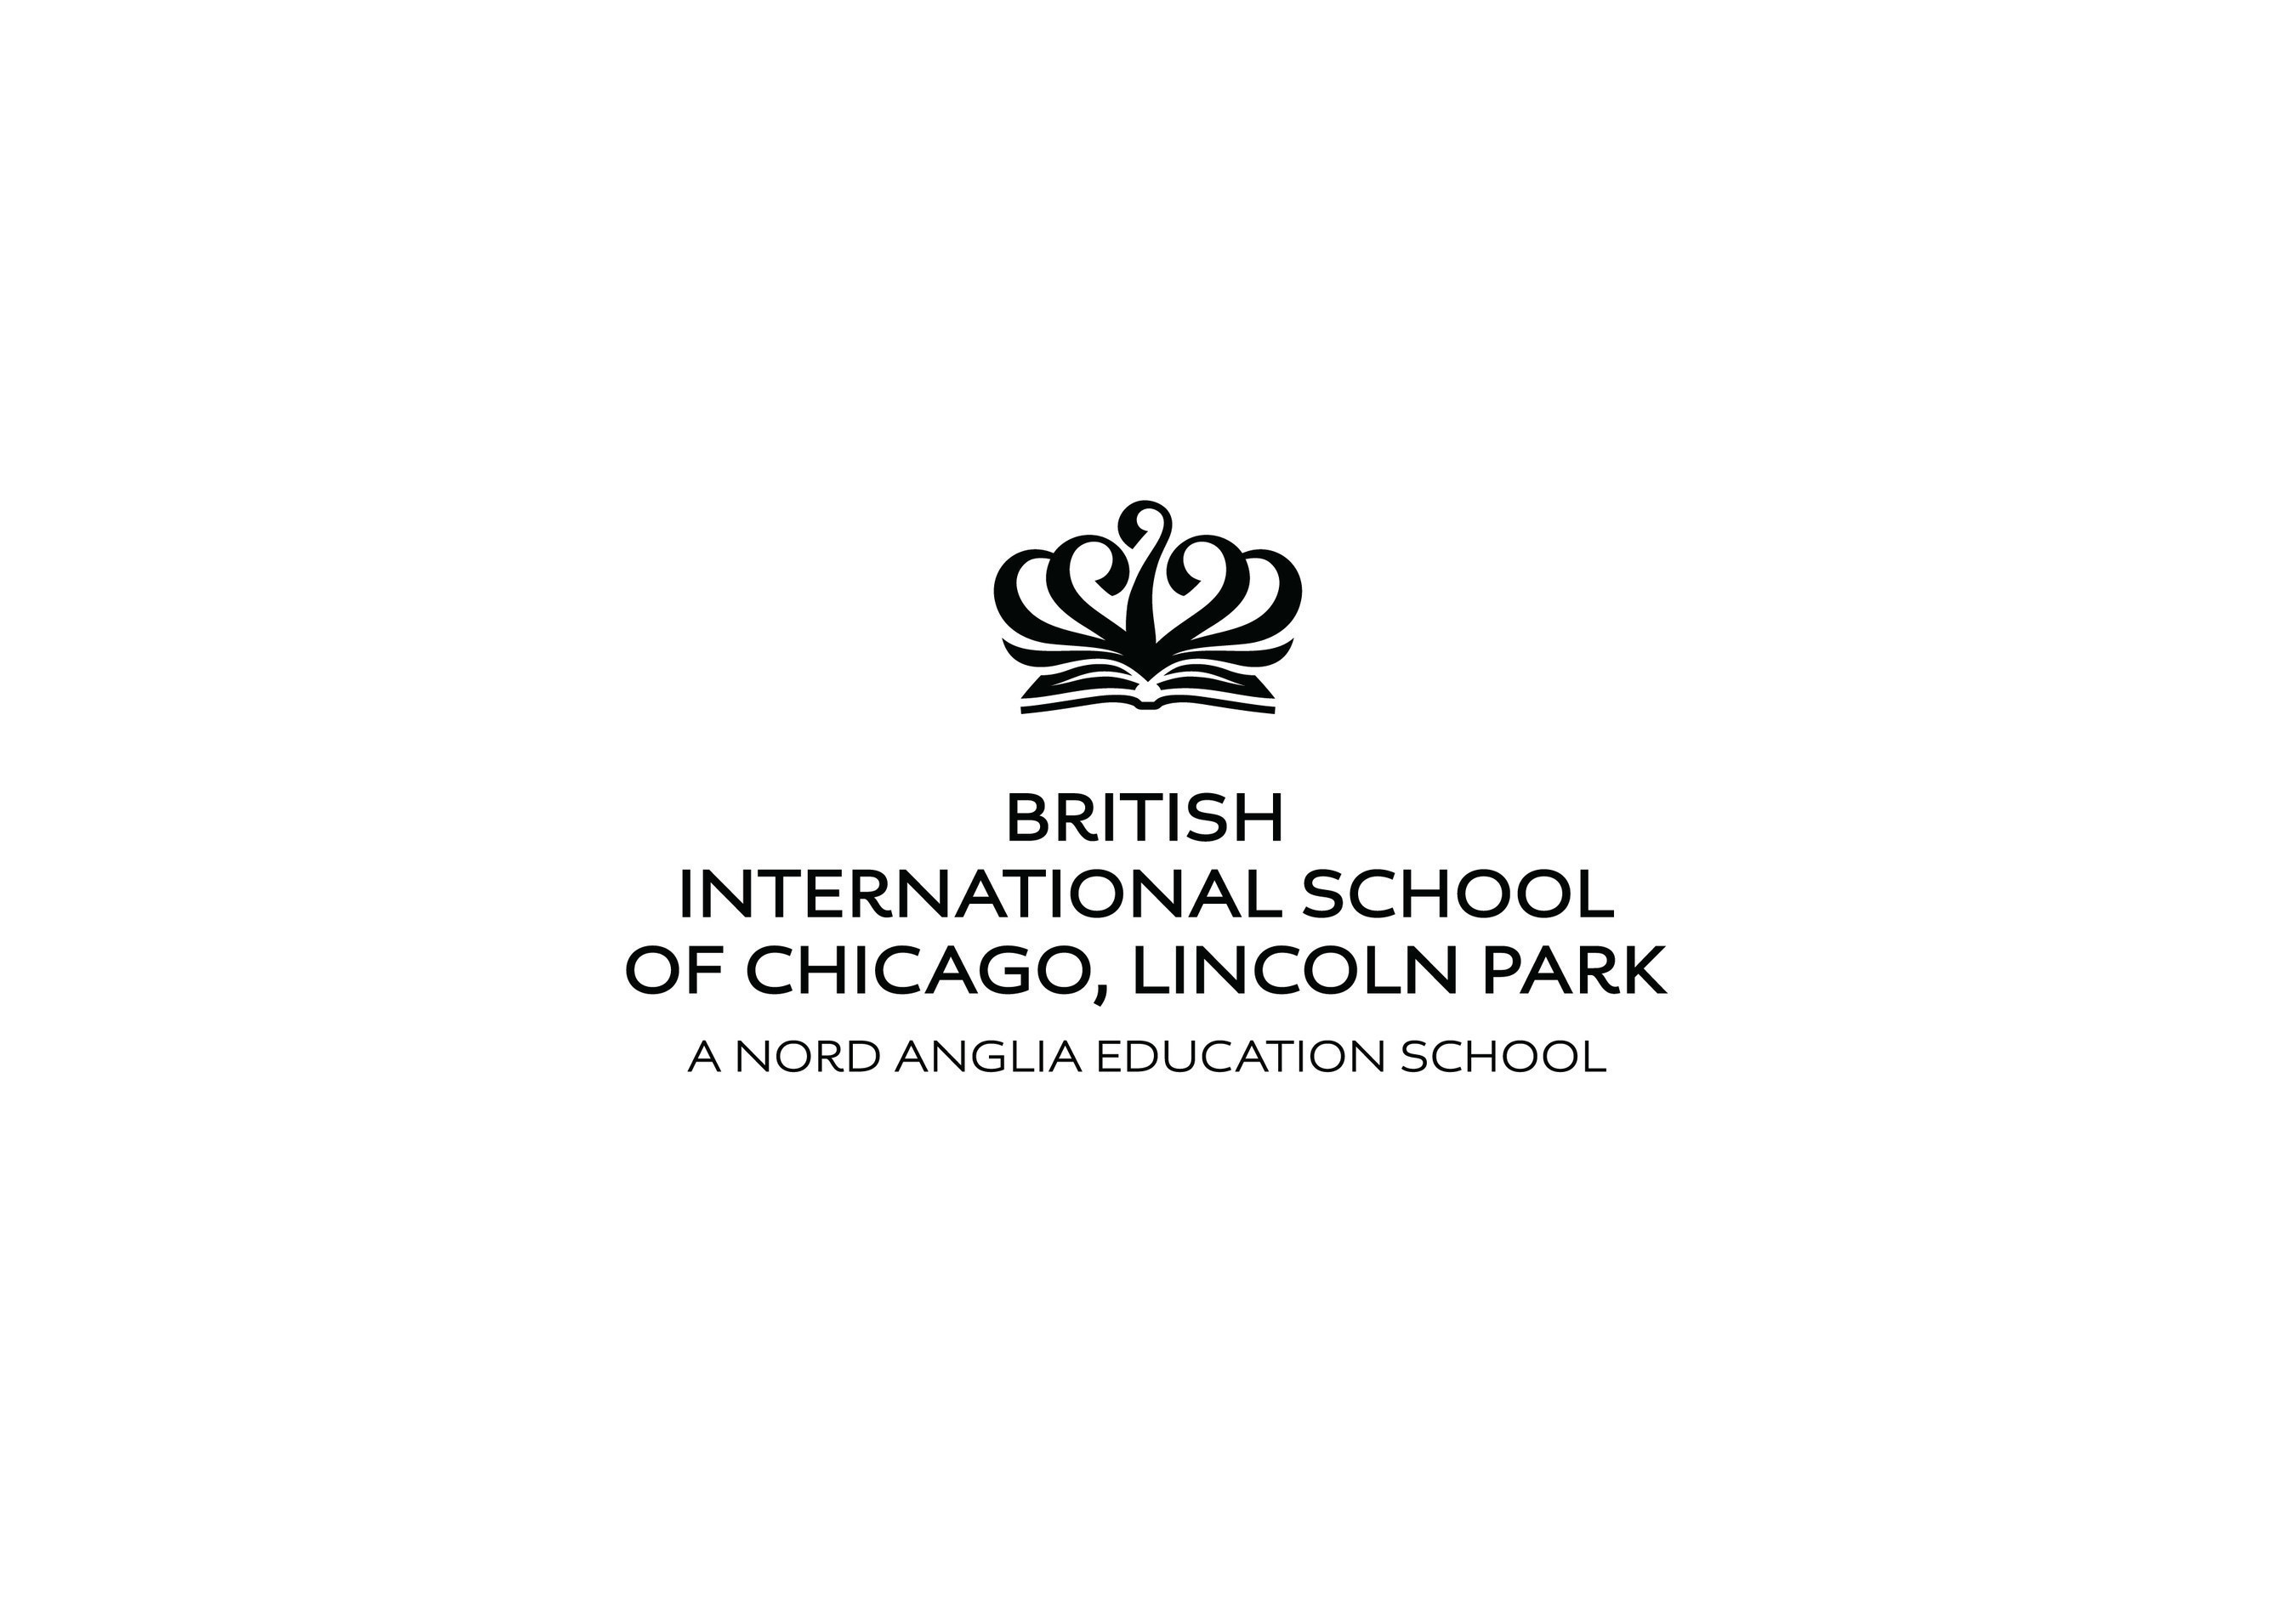 A private, international school in Chicago educating students ages 3 to 11 years old through personalized learning and an innovative, hands on curriculum. Inspiring the critical thinkers and entrepreneurs of tomorrow.